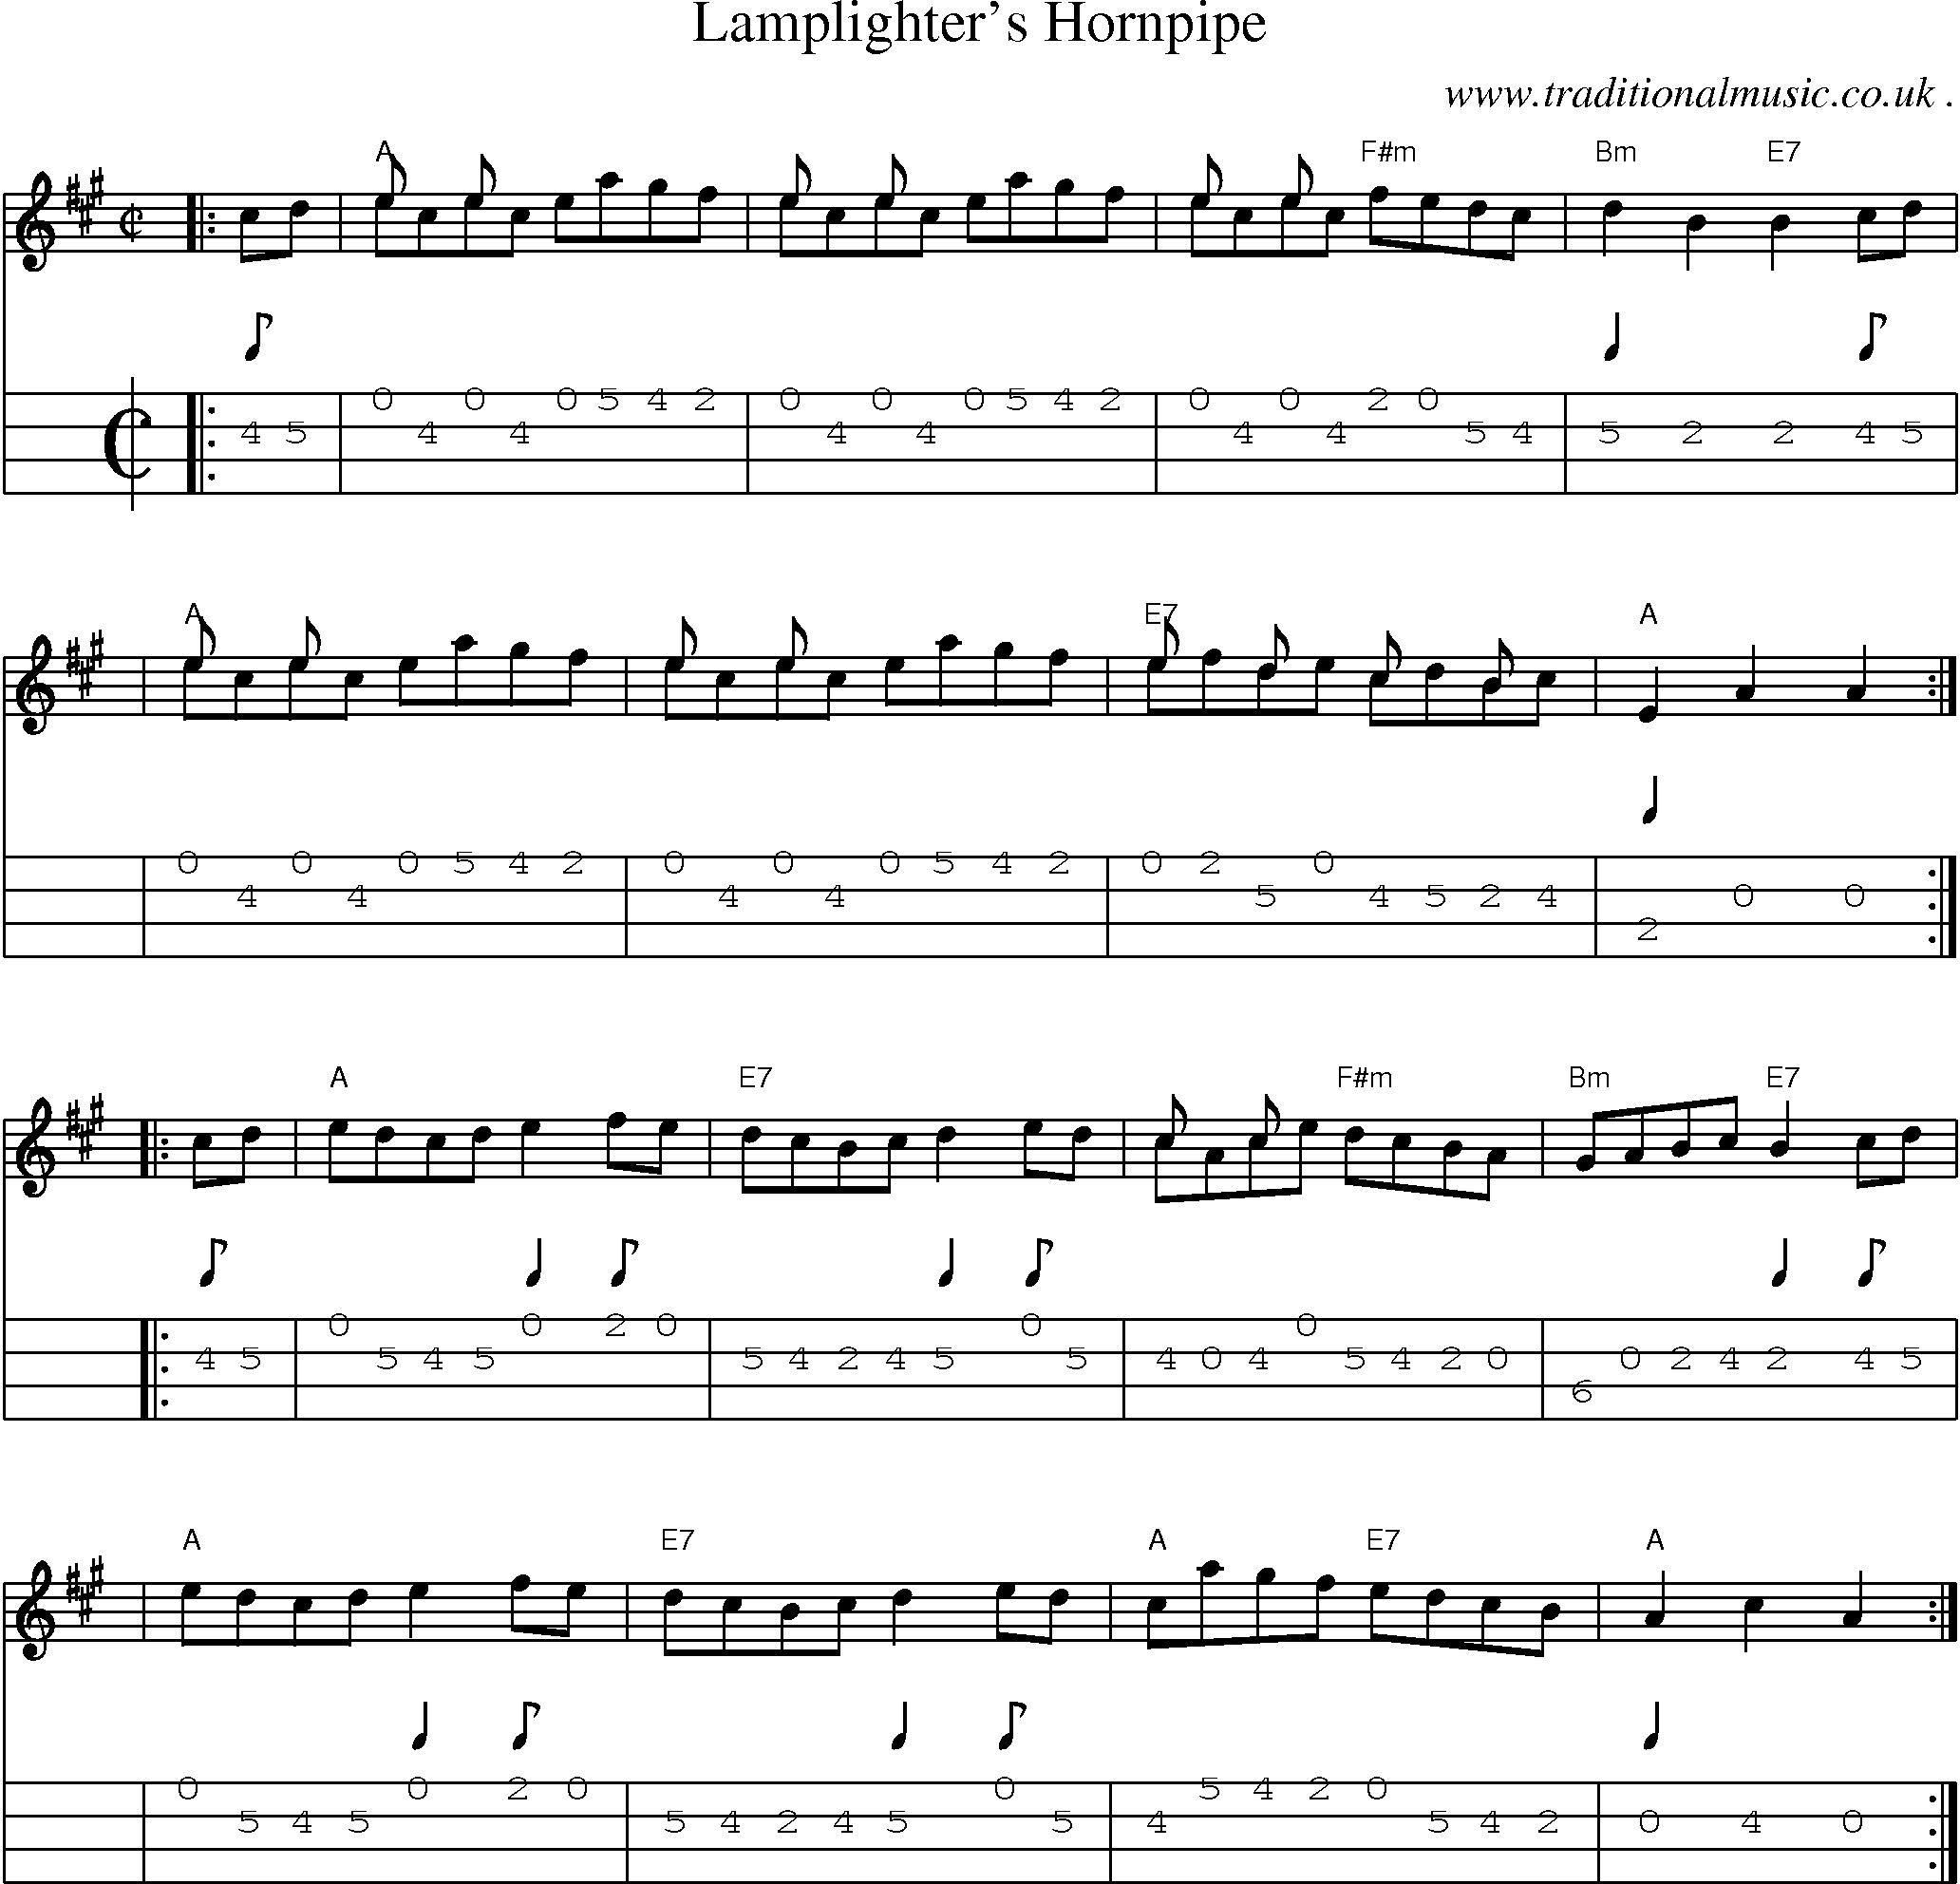 Sheet-music  score, Chords and Mandolin Tabs for Lamplighters Hornpipe